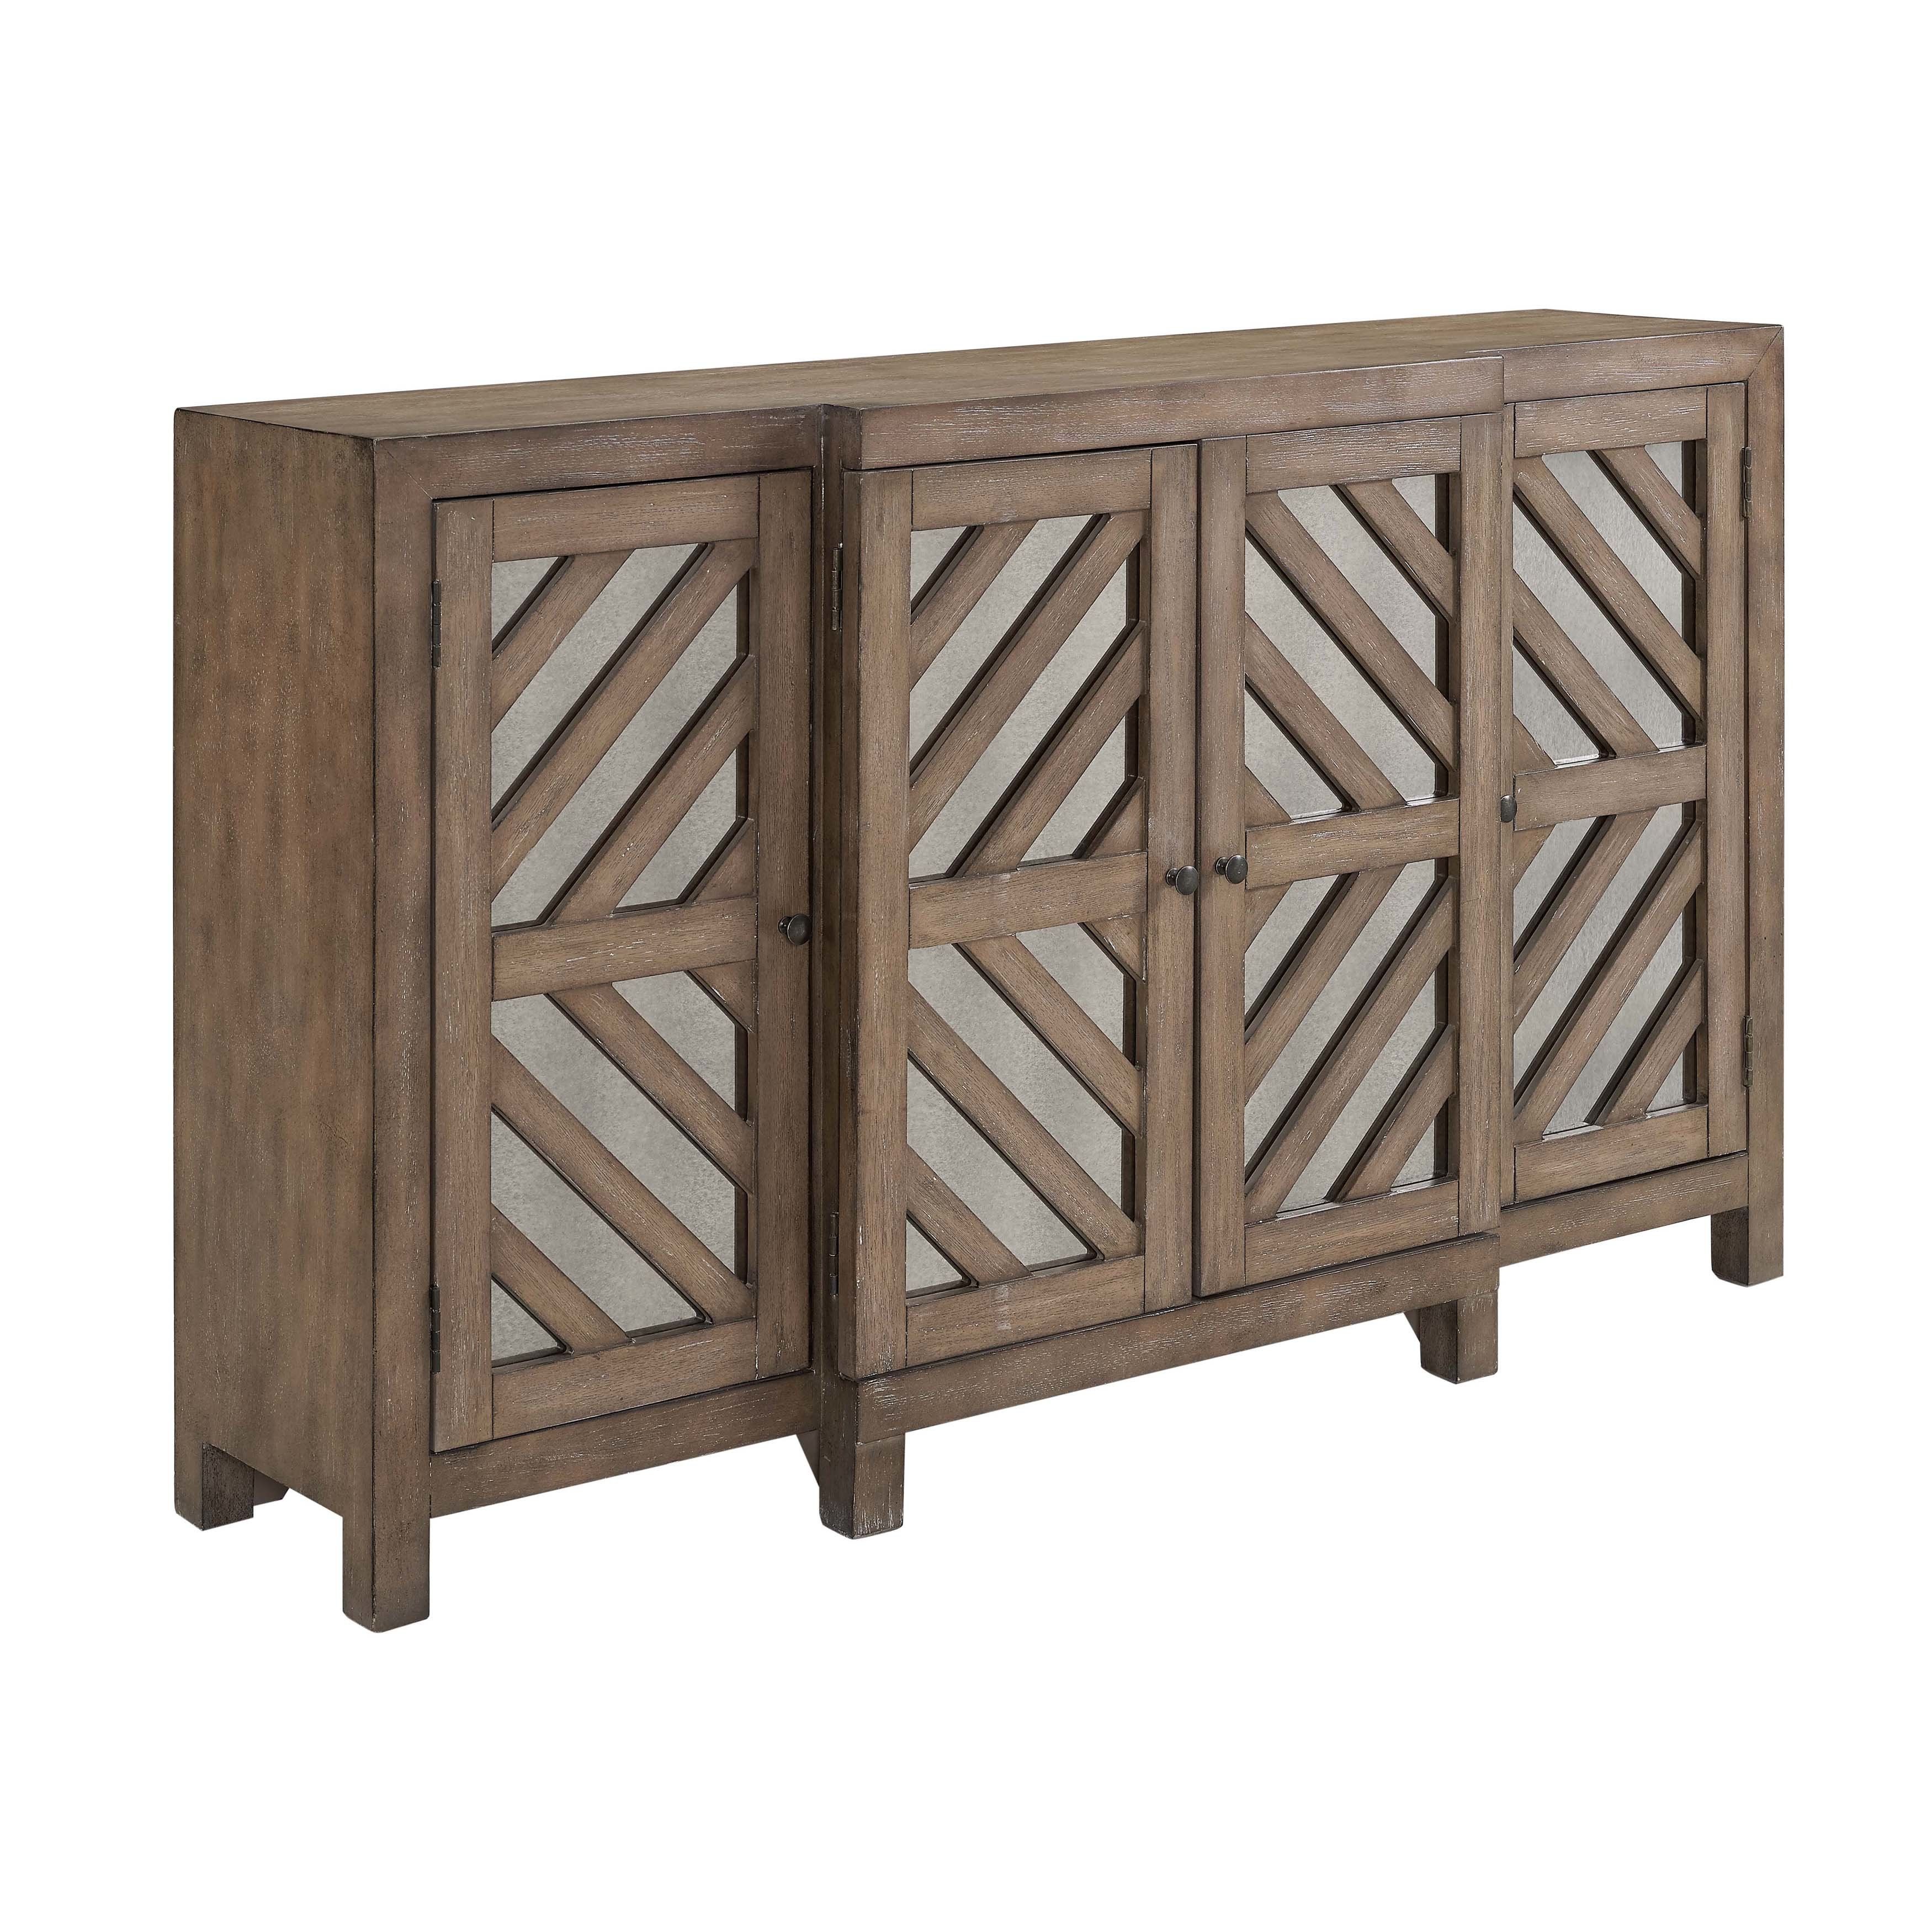 Farmhouse & Rustic Sideboards & Buffets | Birch Lane In Bright Angles Credenzas (View 13 of 30)